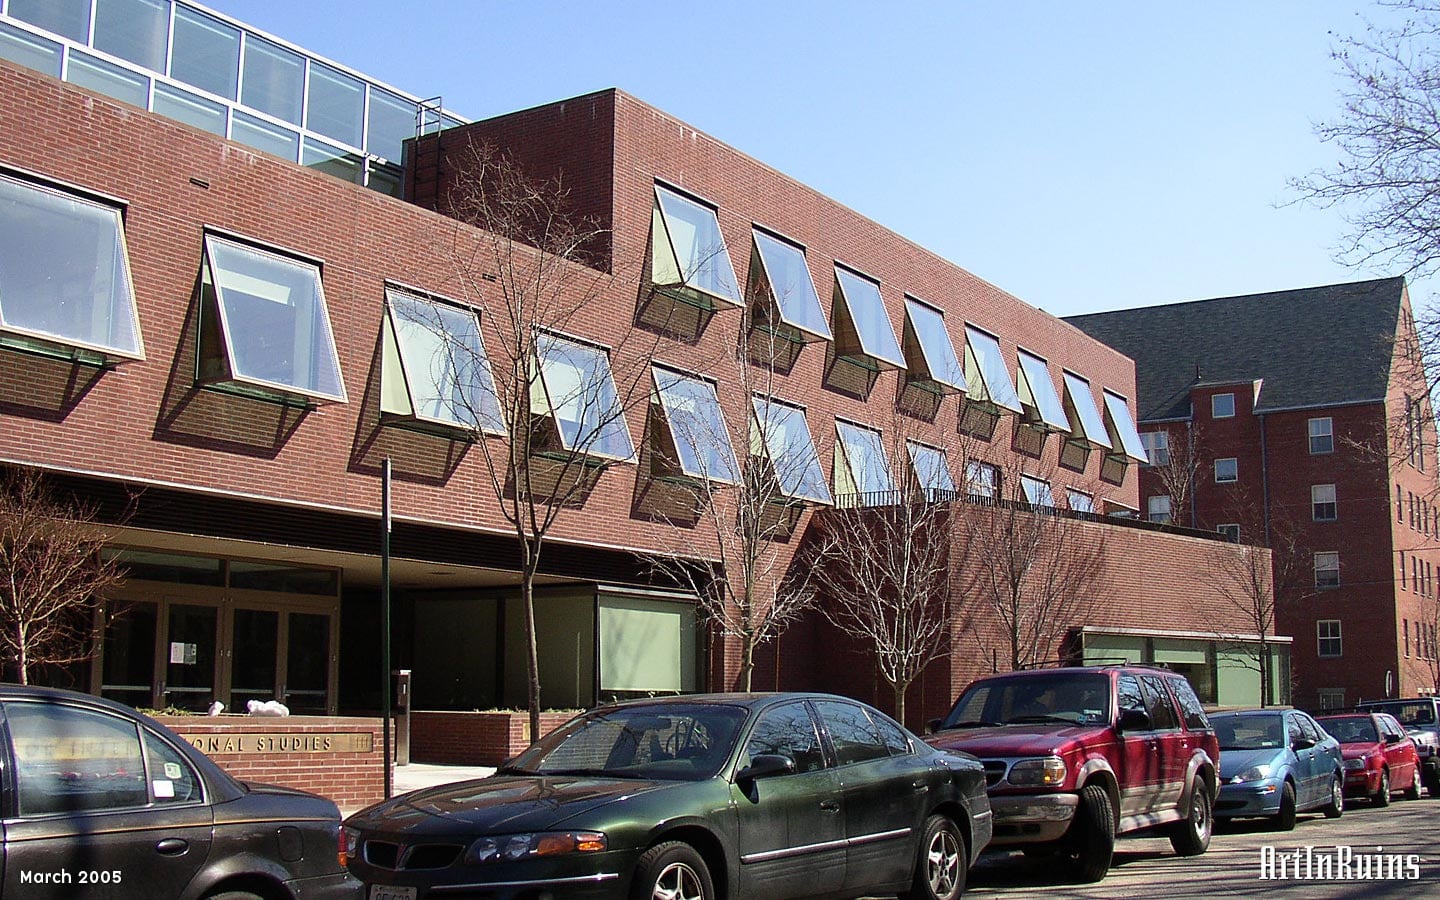 A modernist, oblong, three story brick clad building with rectangular forms and protruding awning-style windows across most of the faces. A central glass atrium and circulation area can be seen from the tall ribbon windows on either end. 